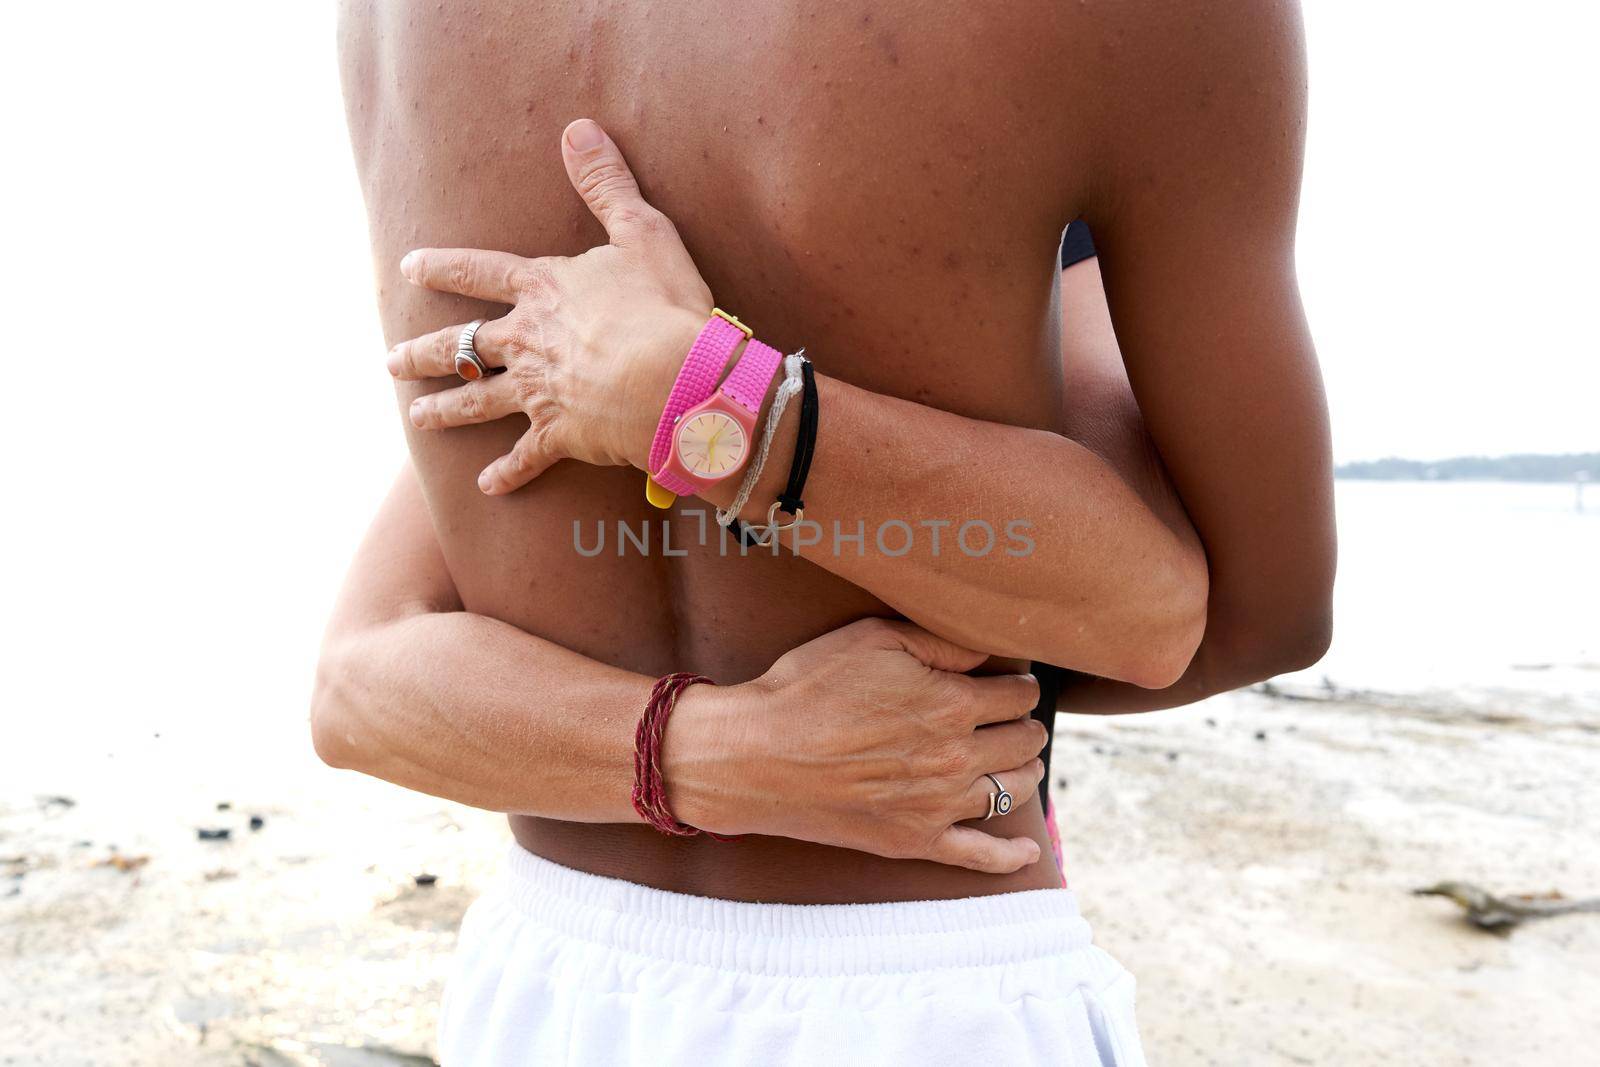 Hands of a caucasian woman embracing the body of an asian man on a beach by WesternExoticStockers